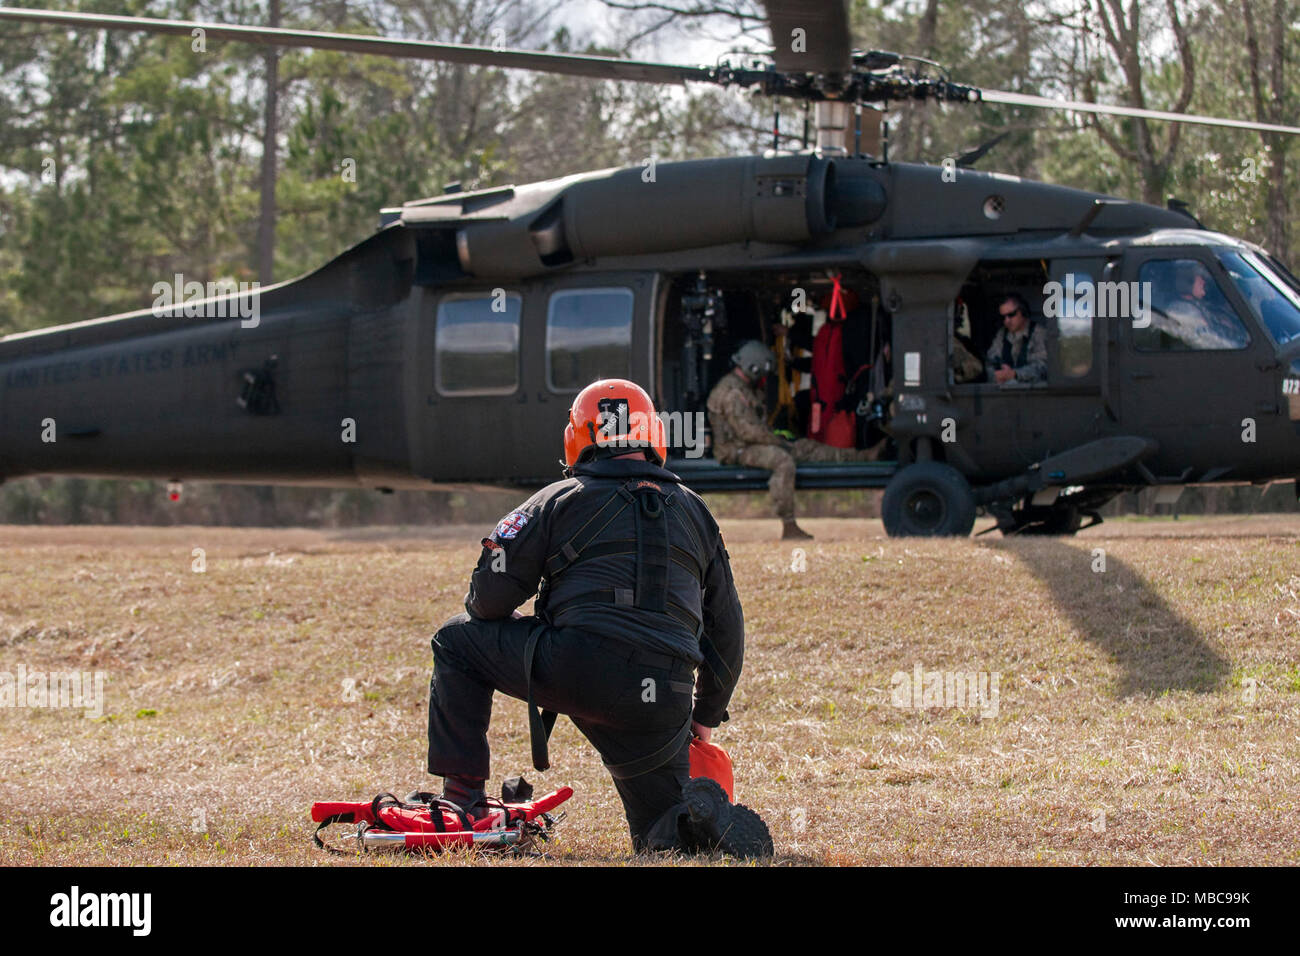 U.S. Army Soldiers with the South Carolina National Guard and members of the South Carolina Helicopter Aquatic Rescue Team use a UH-60 Black Hawk to simulate rescuing survivors from rooftops during the PATRIOT South 18 exercise at Camp Shelby, Miss., Feb. 15, 2018. PATRIOT South 2018 tests the combined abilities of the National Guard, along with state and local agencies, to respond during natural disasters using simulated emergency scenarios. (U.S. Air National Guard Stock Photo